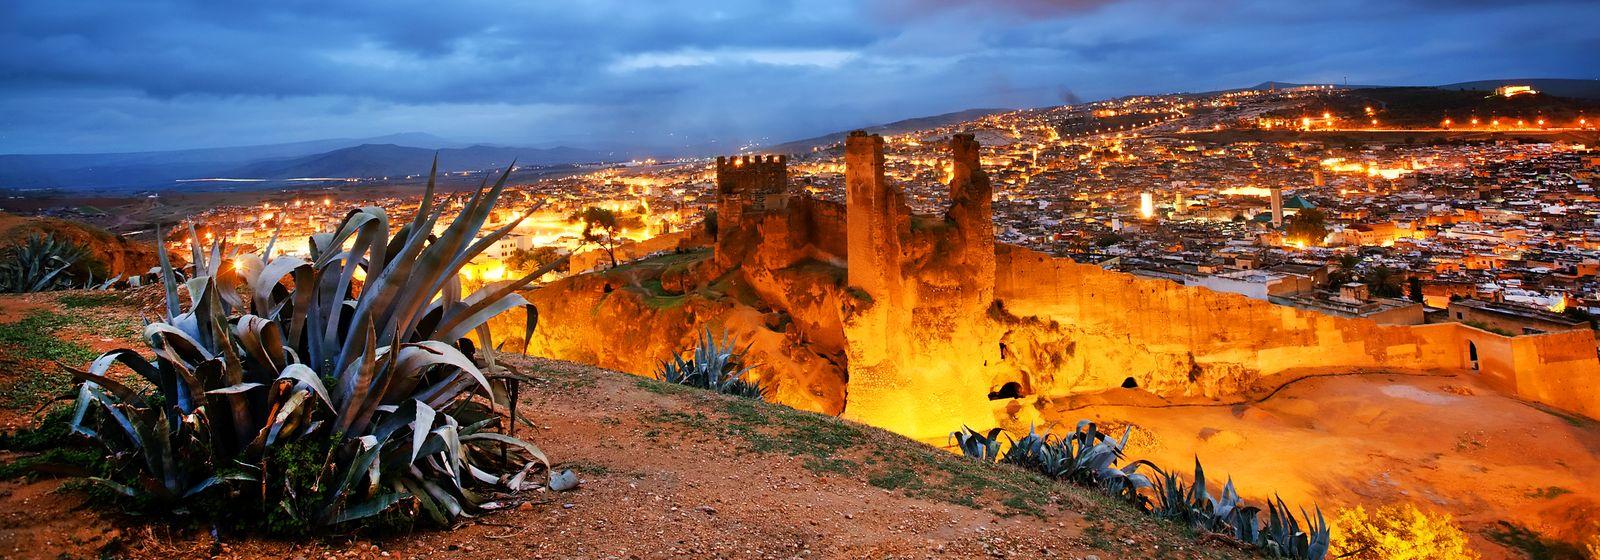 The walls of Fez at night